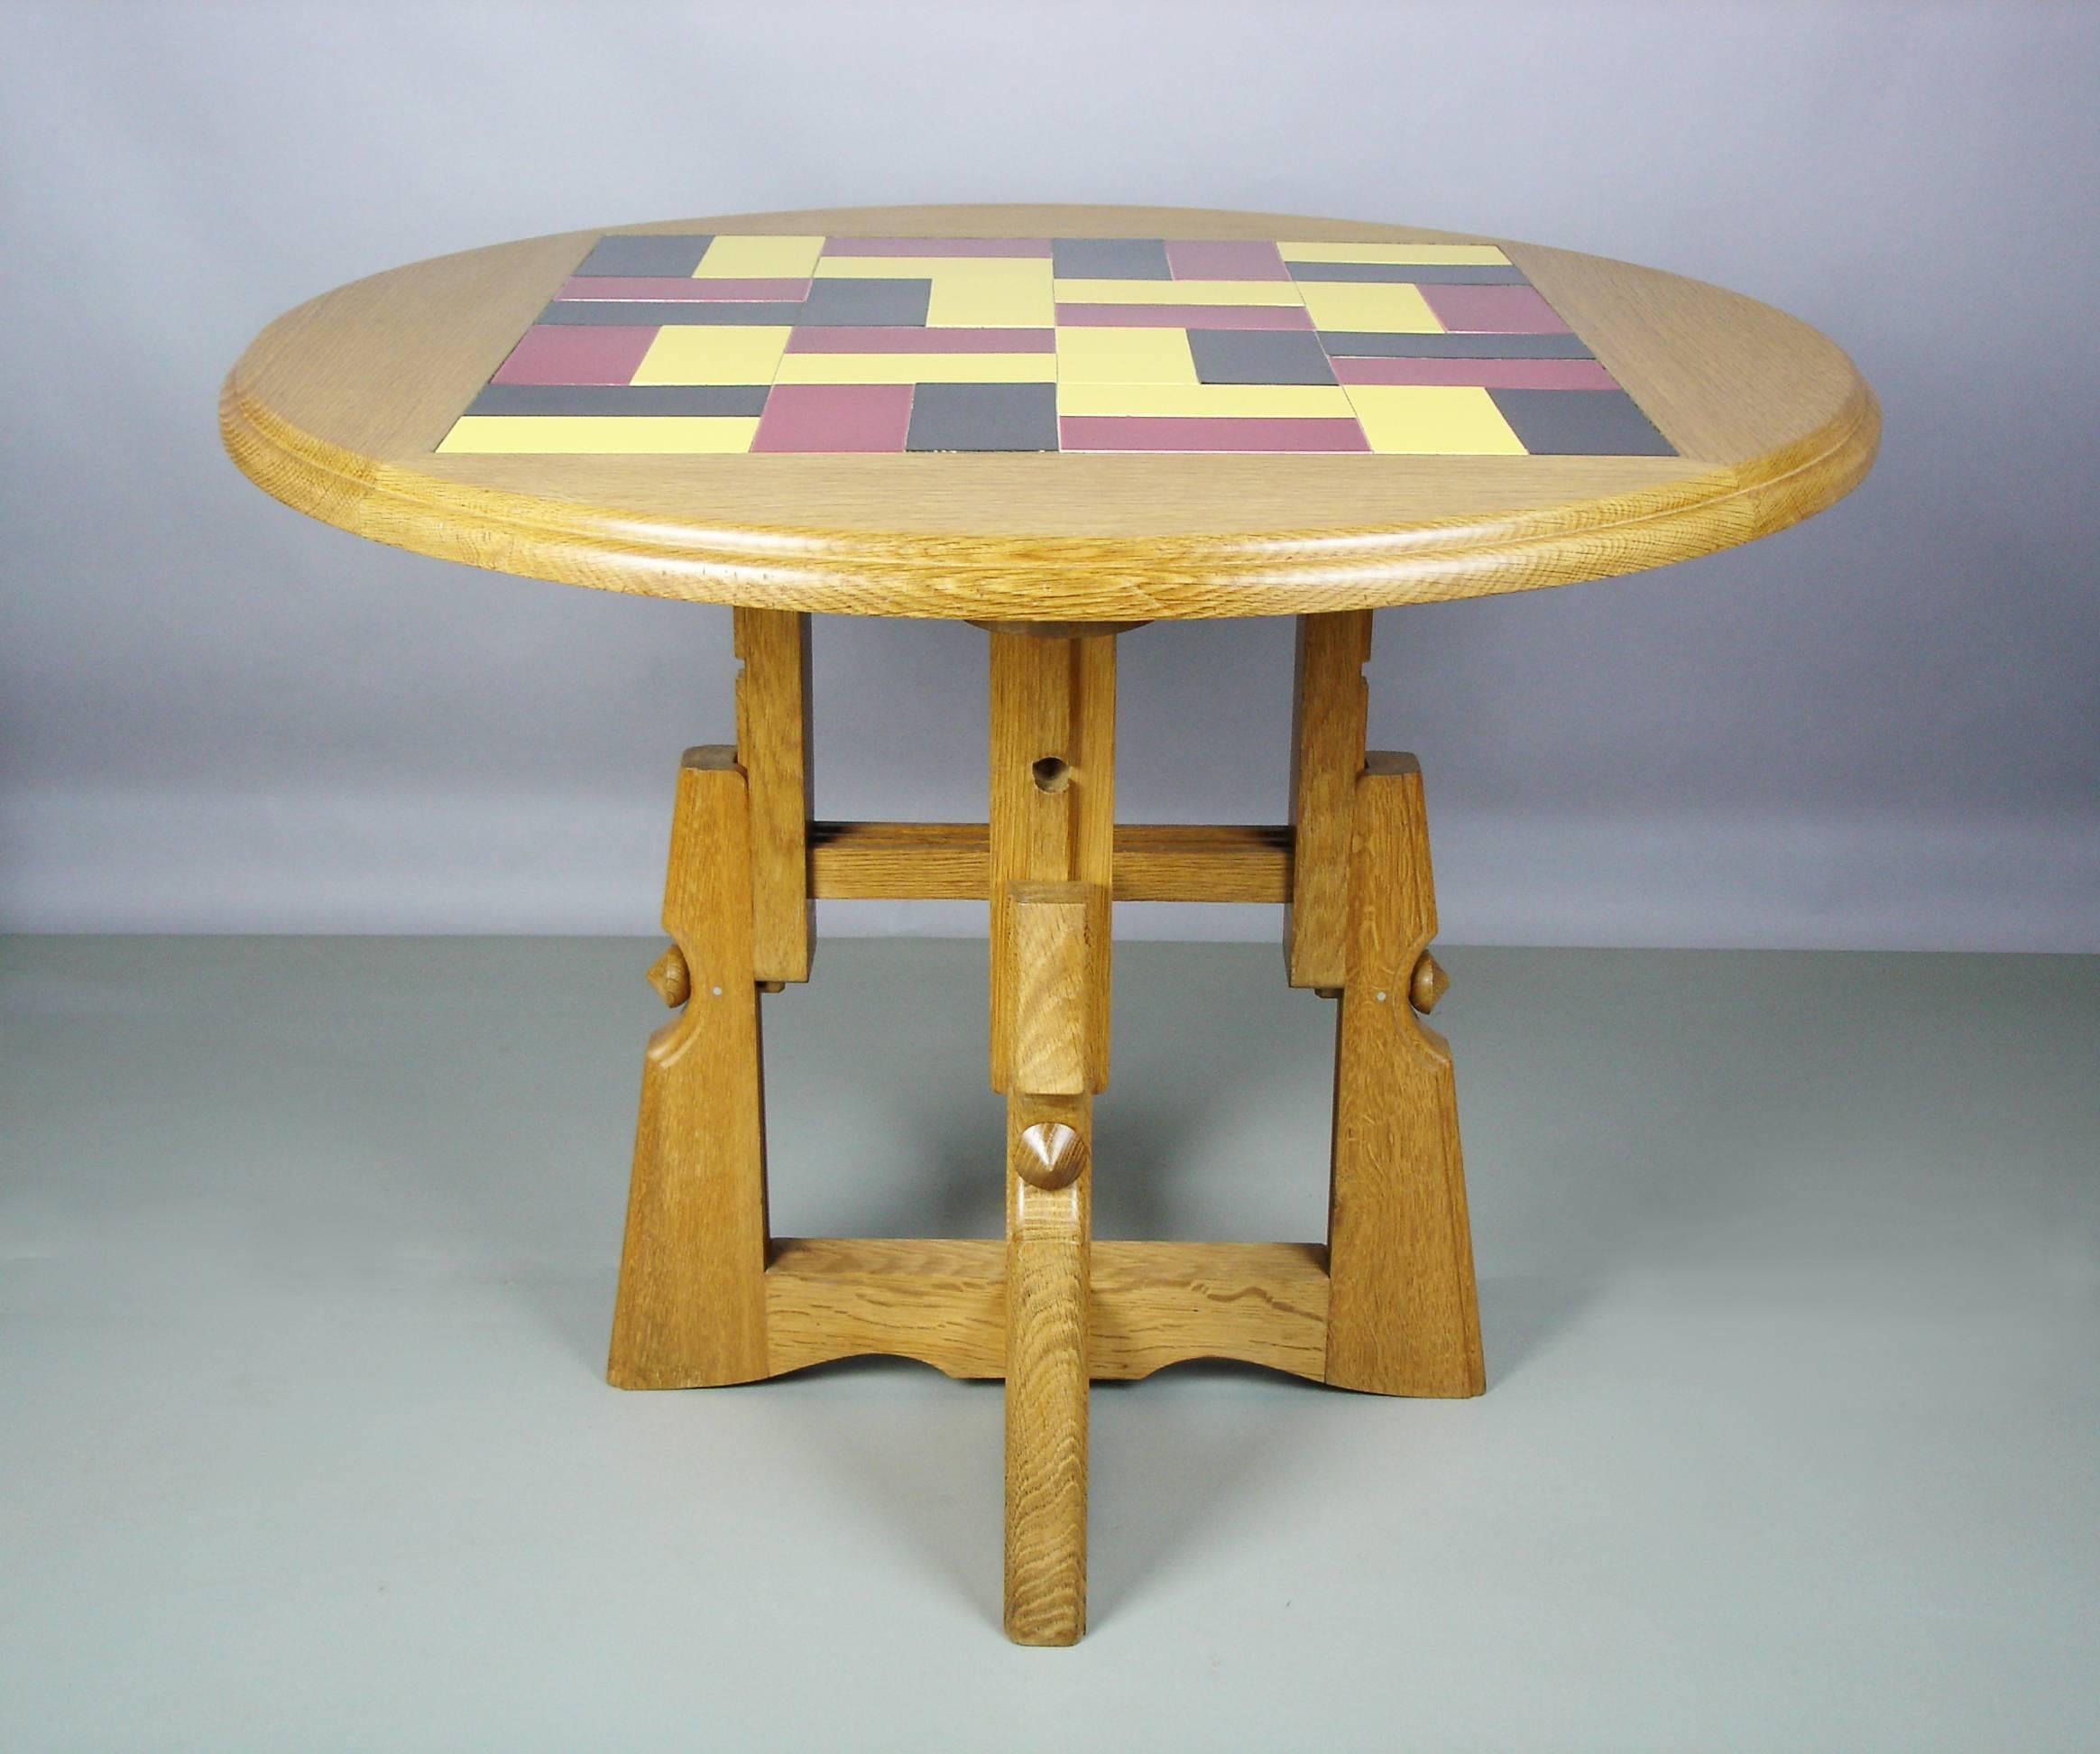 A solid oak table with red, yellow, black tiles fit in square into the top. Two adjustable heights:
20in or 28.25in.